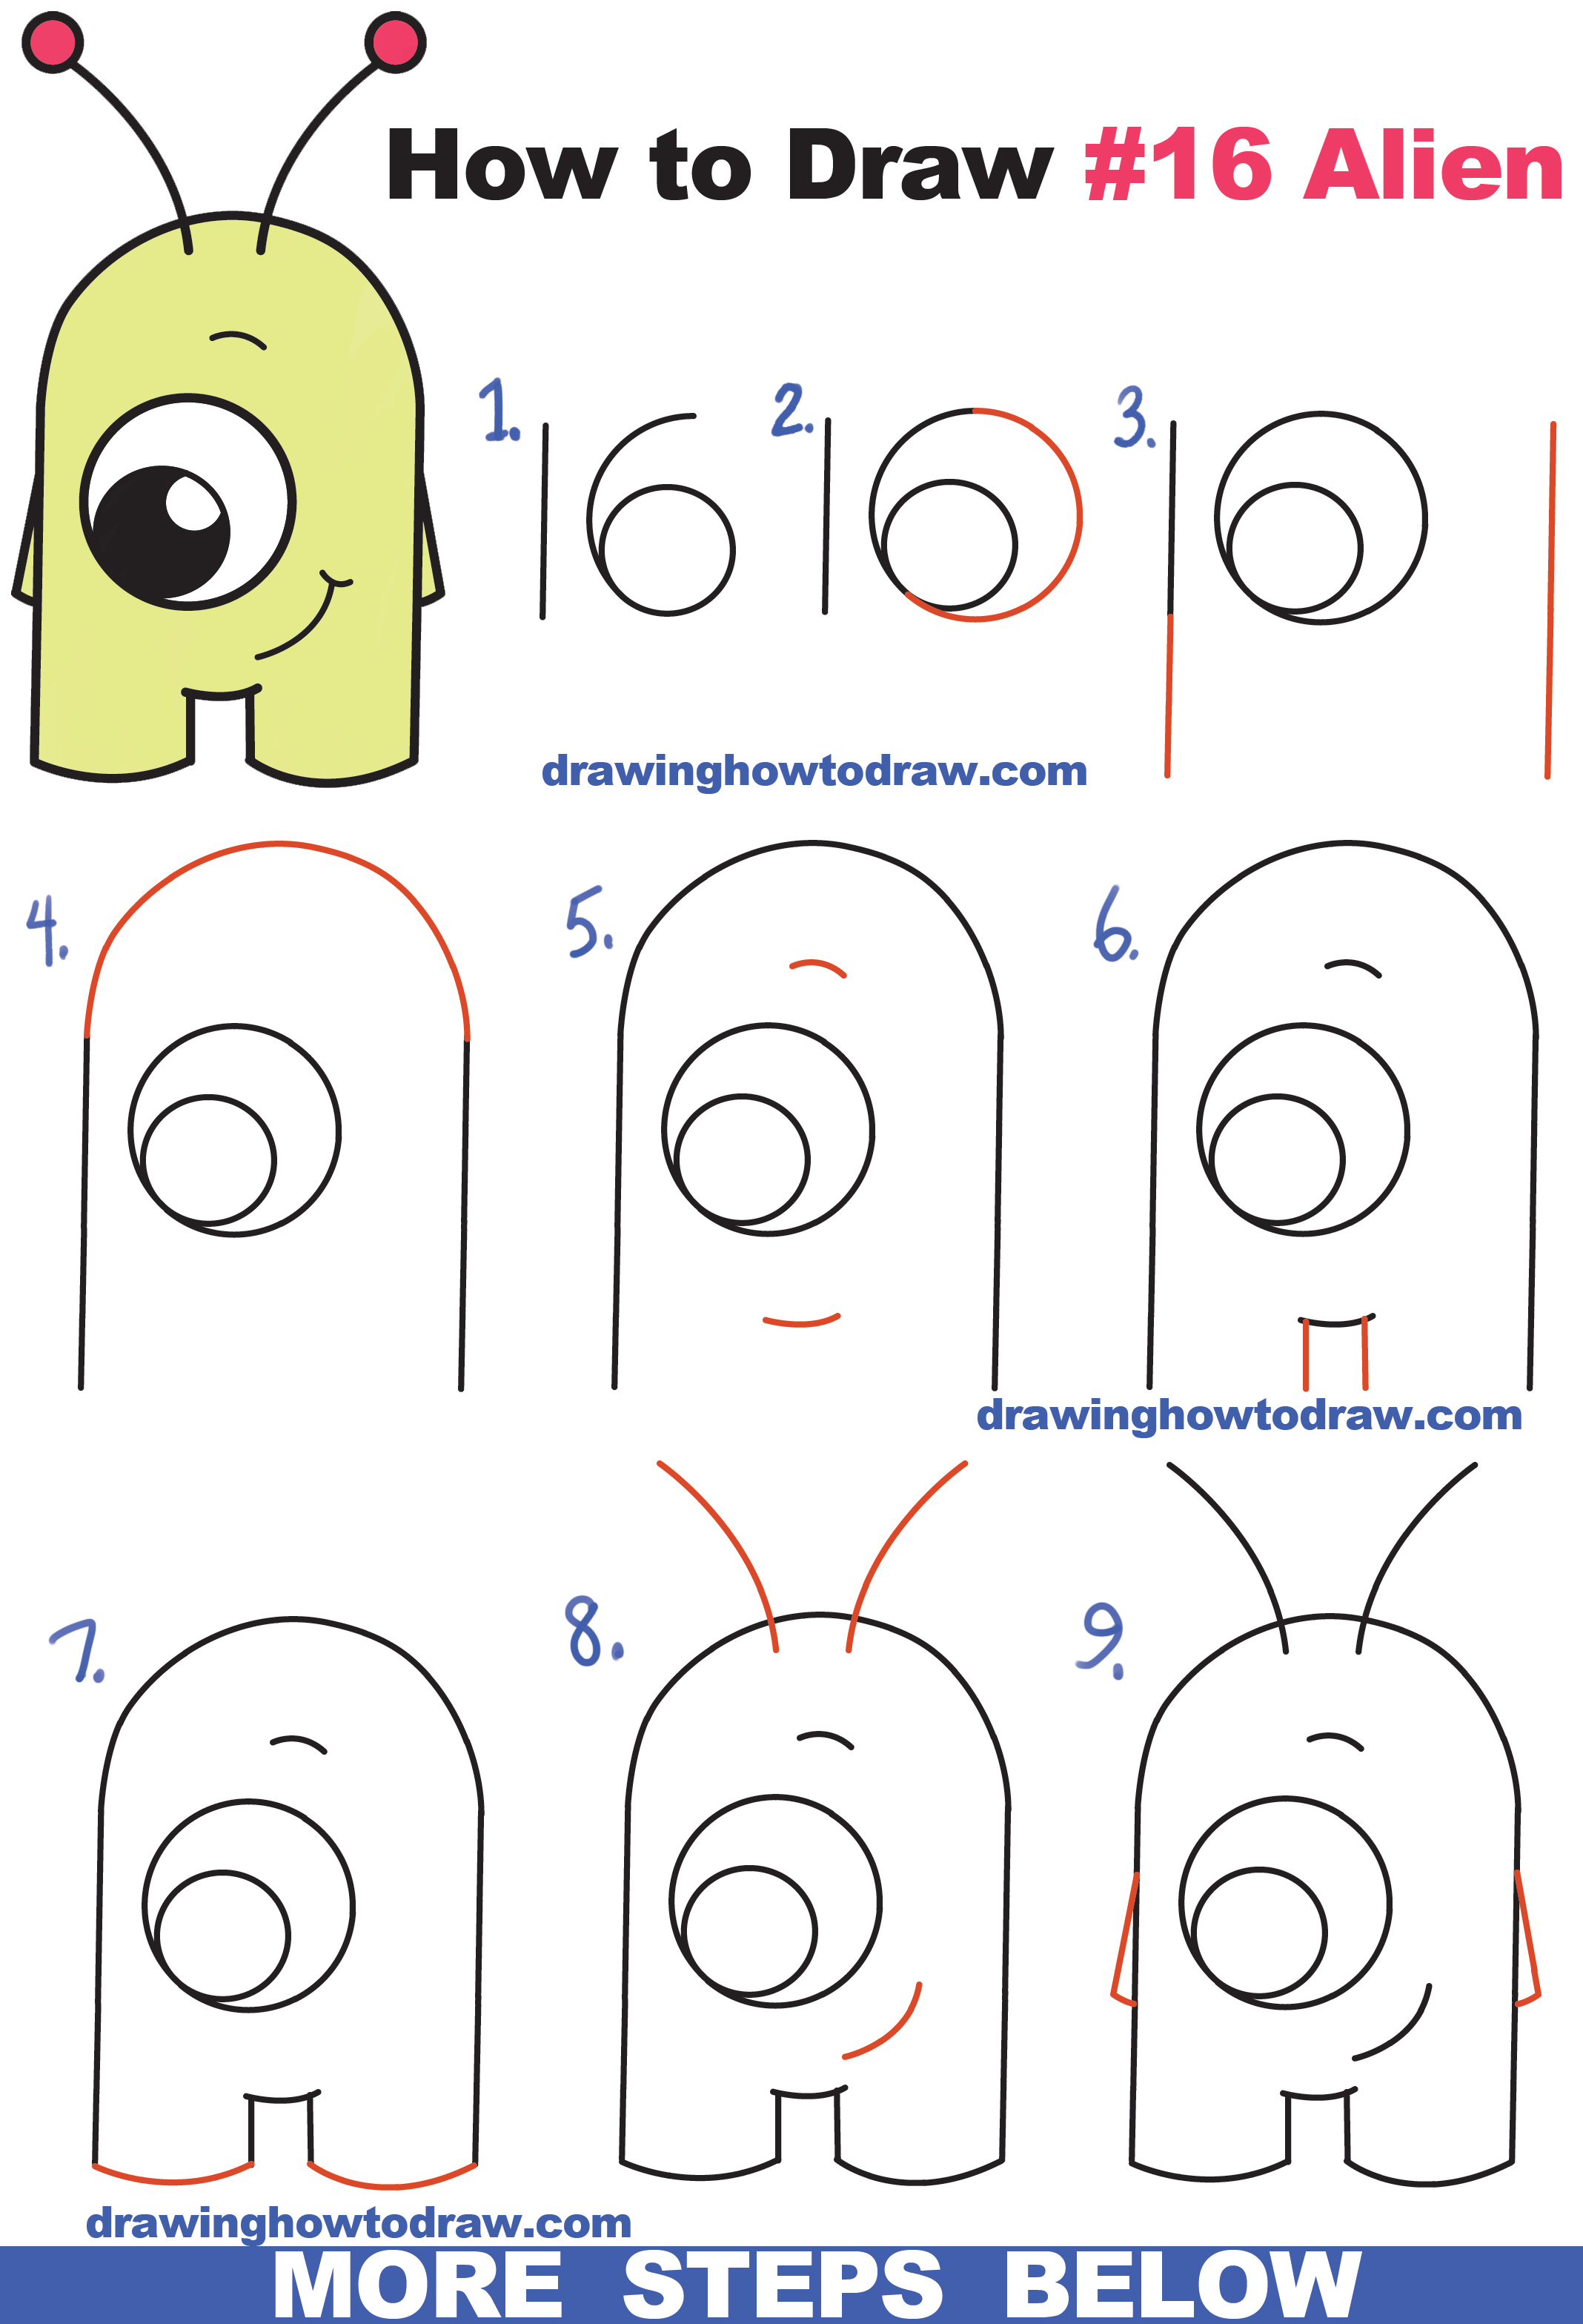 HOW TO DRAW AN ALIEN 